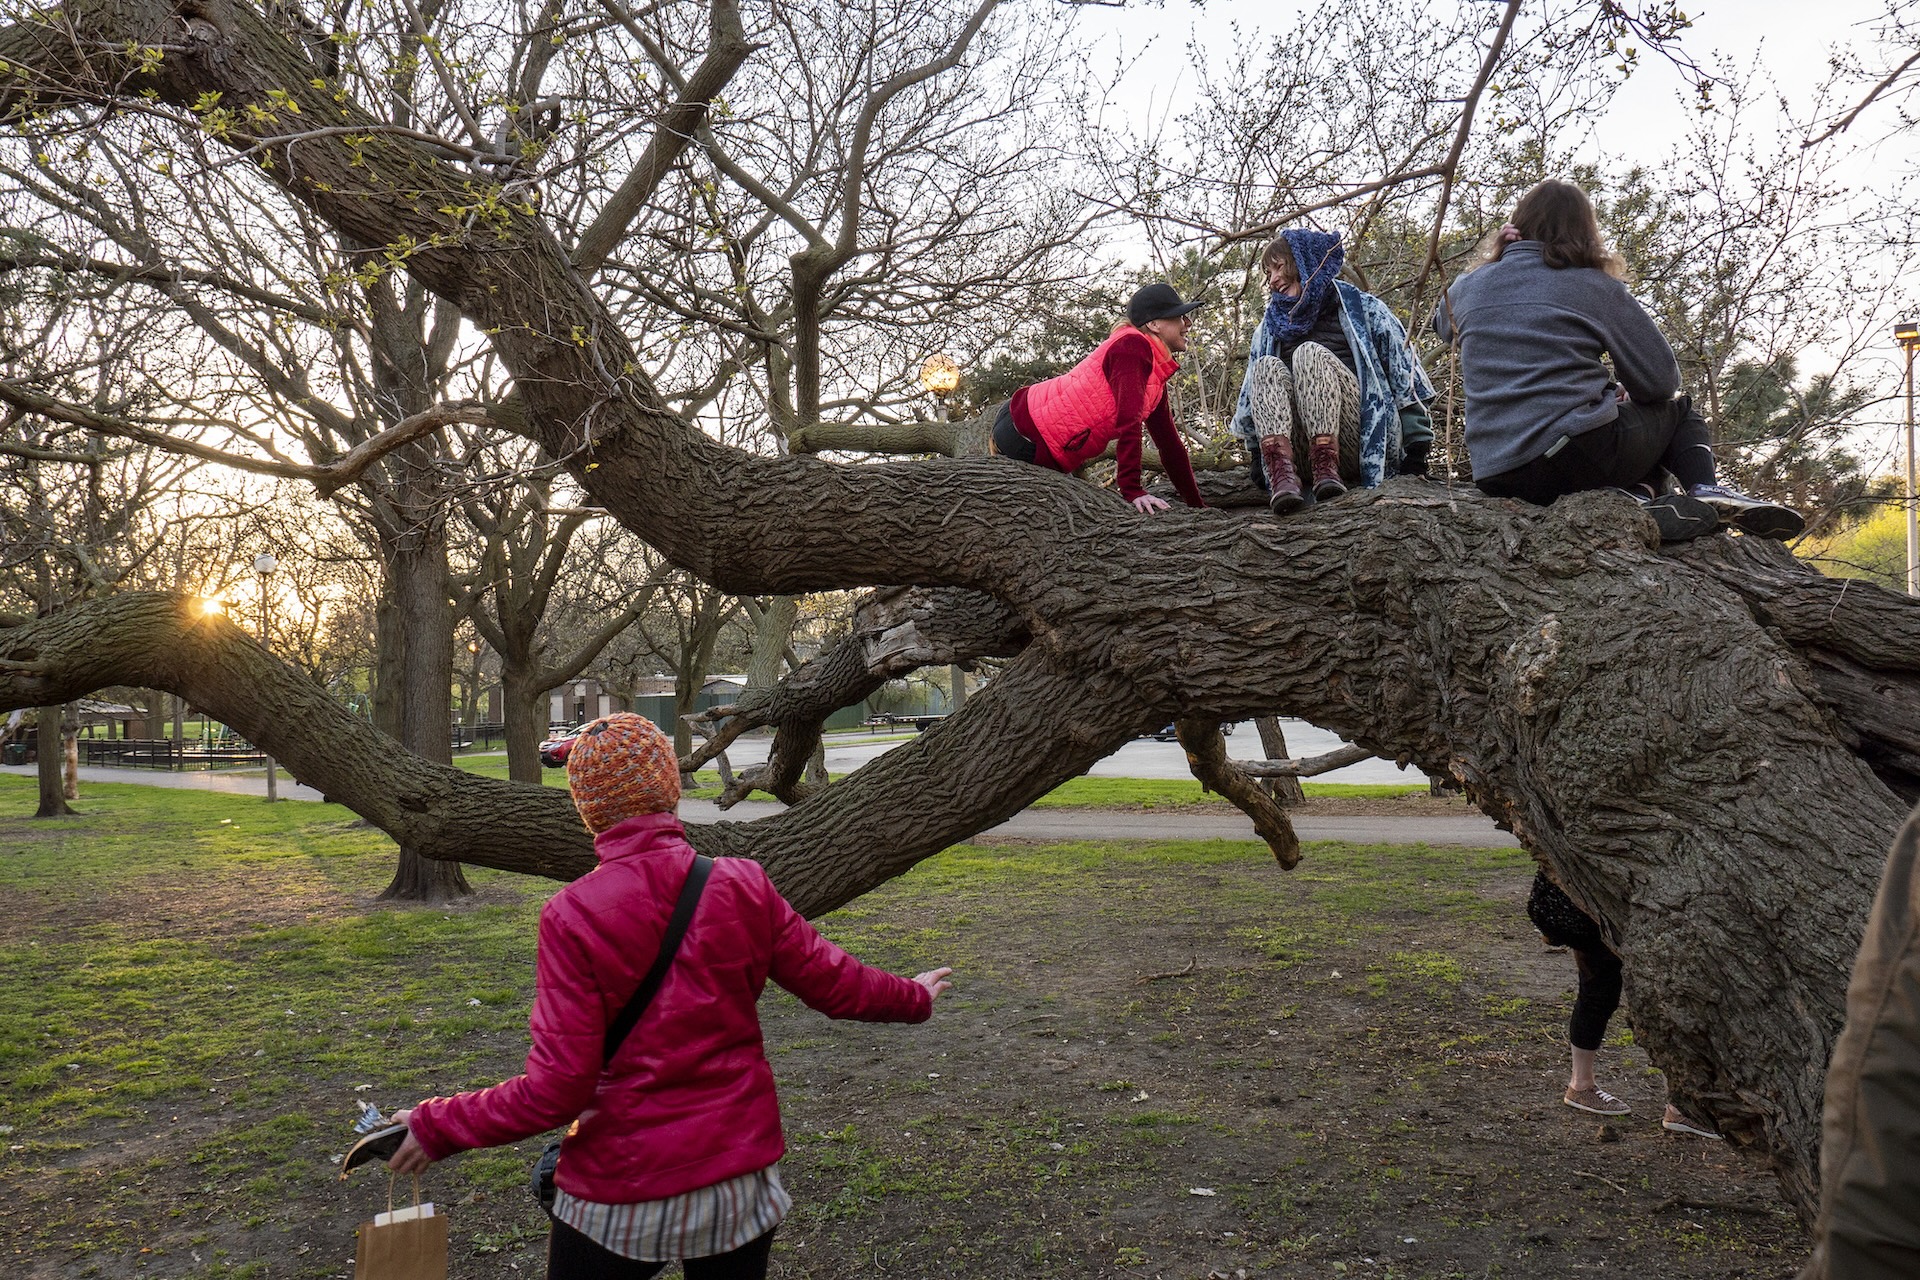 Four adults in winter clothing climb on horizonal tree branch with the sunset behind them.